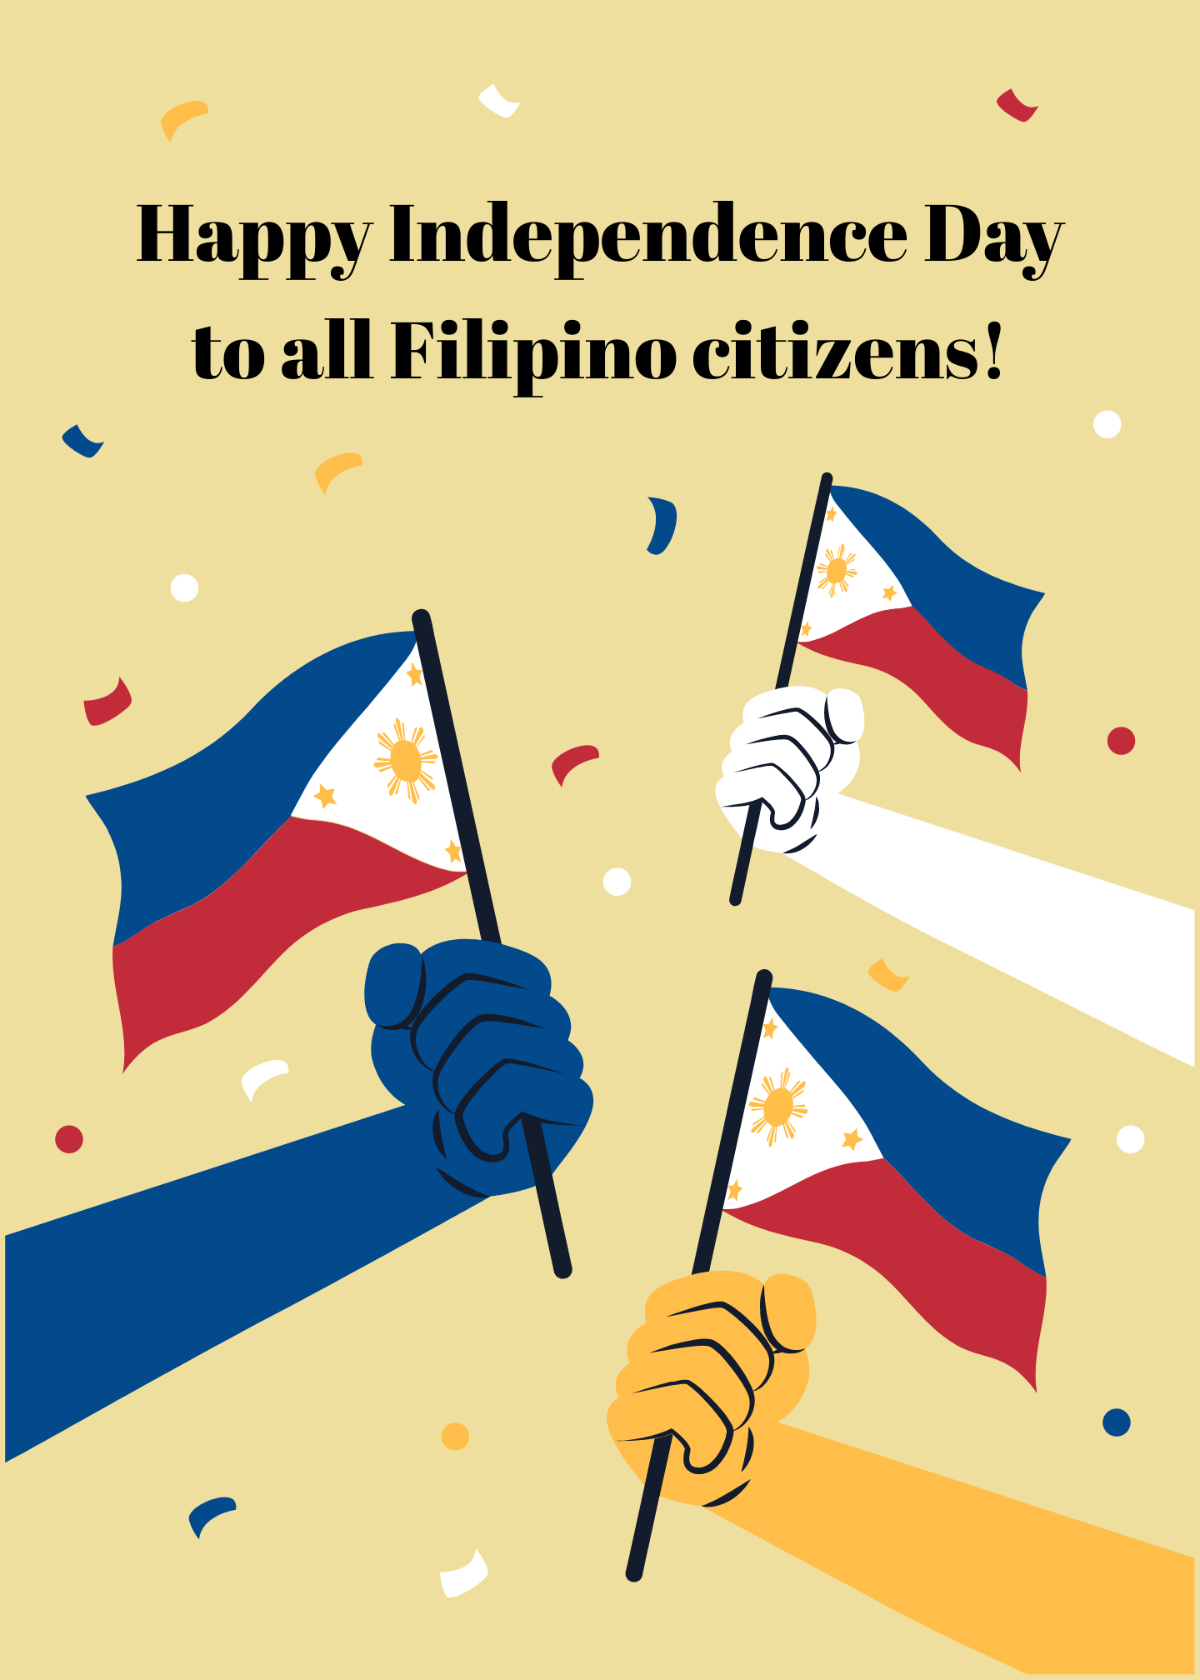 Philippine Independence Day Greeting Card